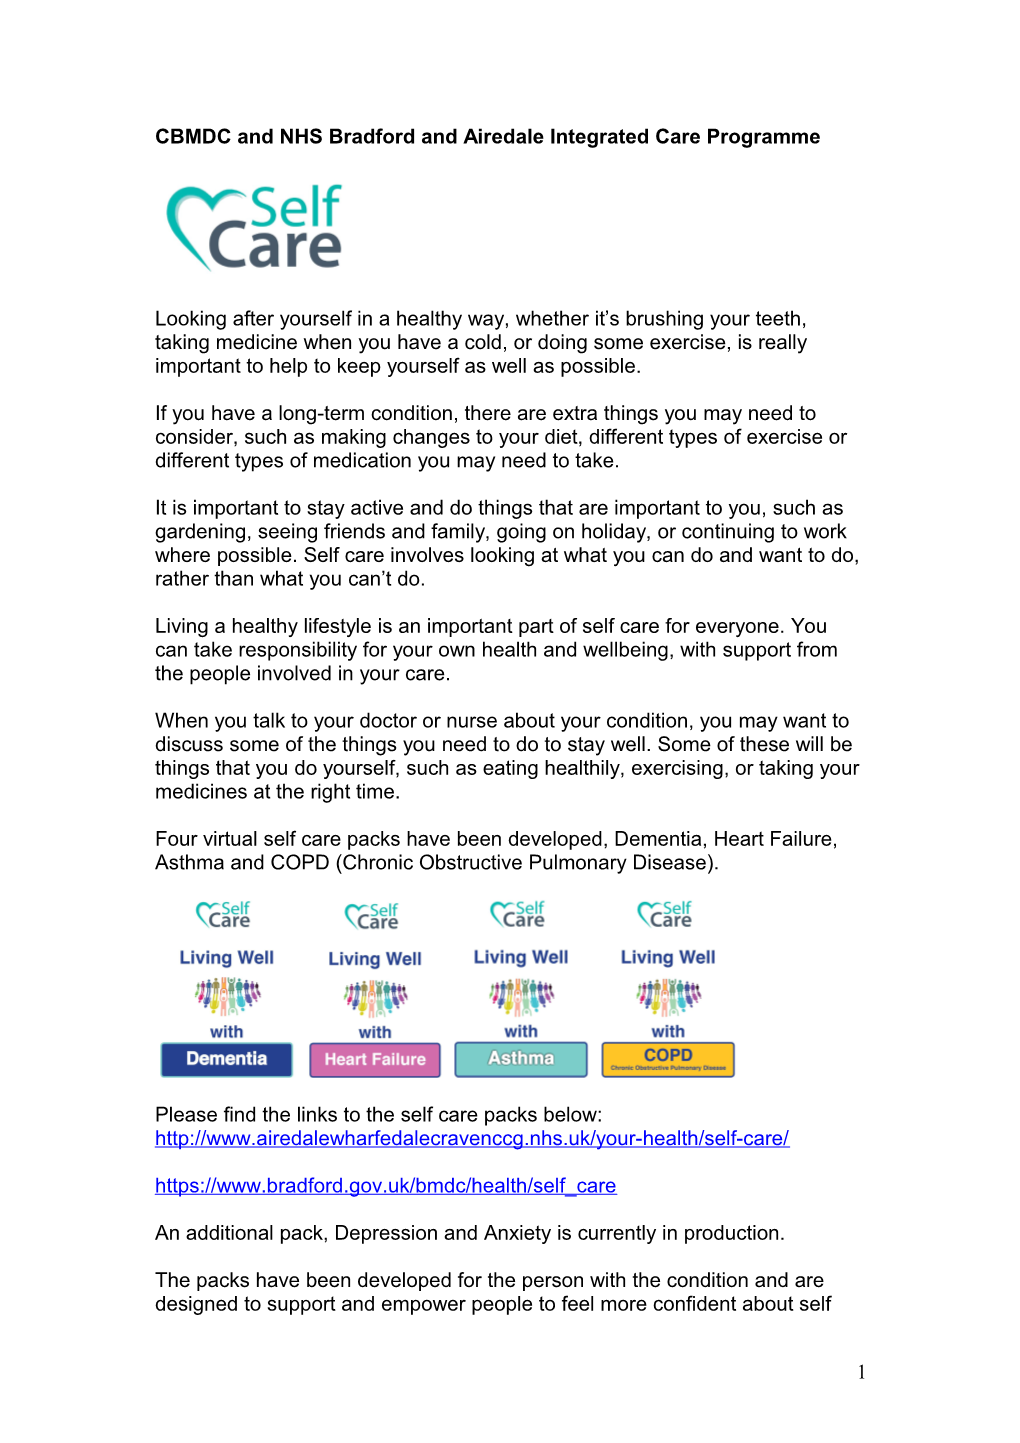 CBMDC and NHS Bradford and Airedale Integrated Care Programme